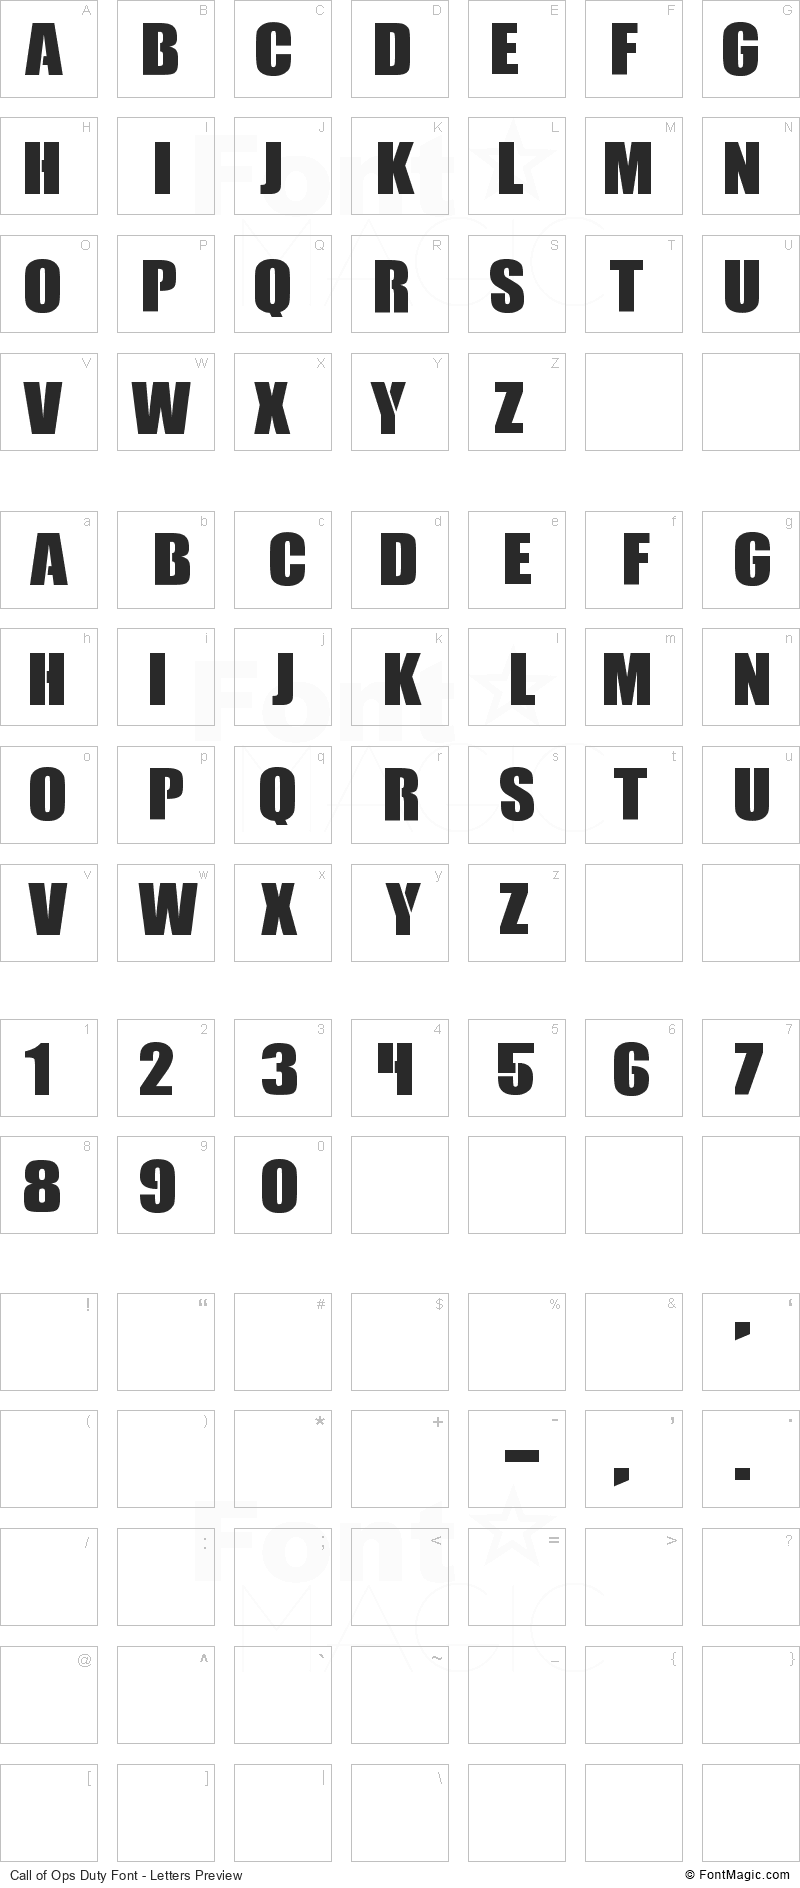 Call of Ops Duty Font - All Latters Preview Chart